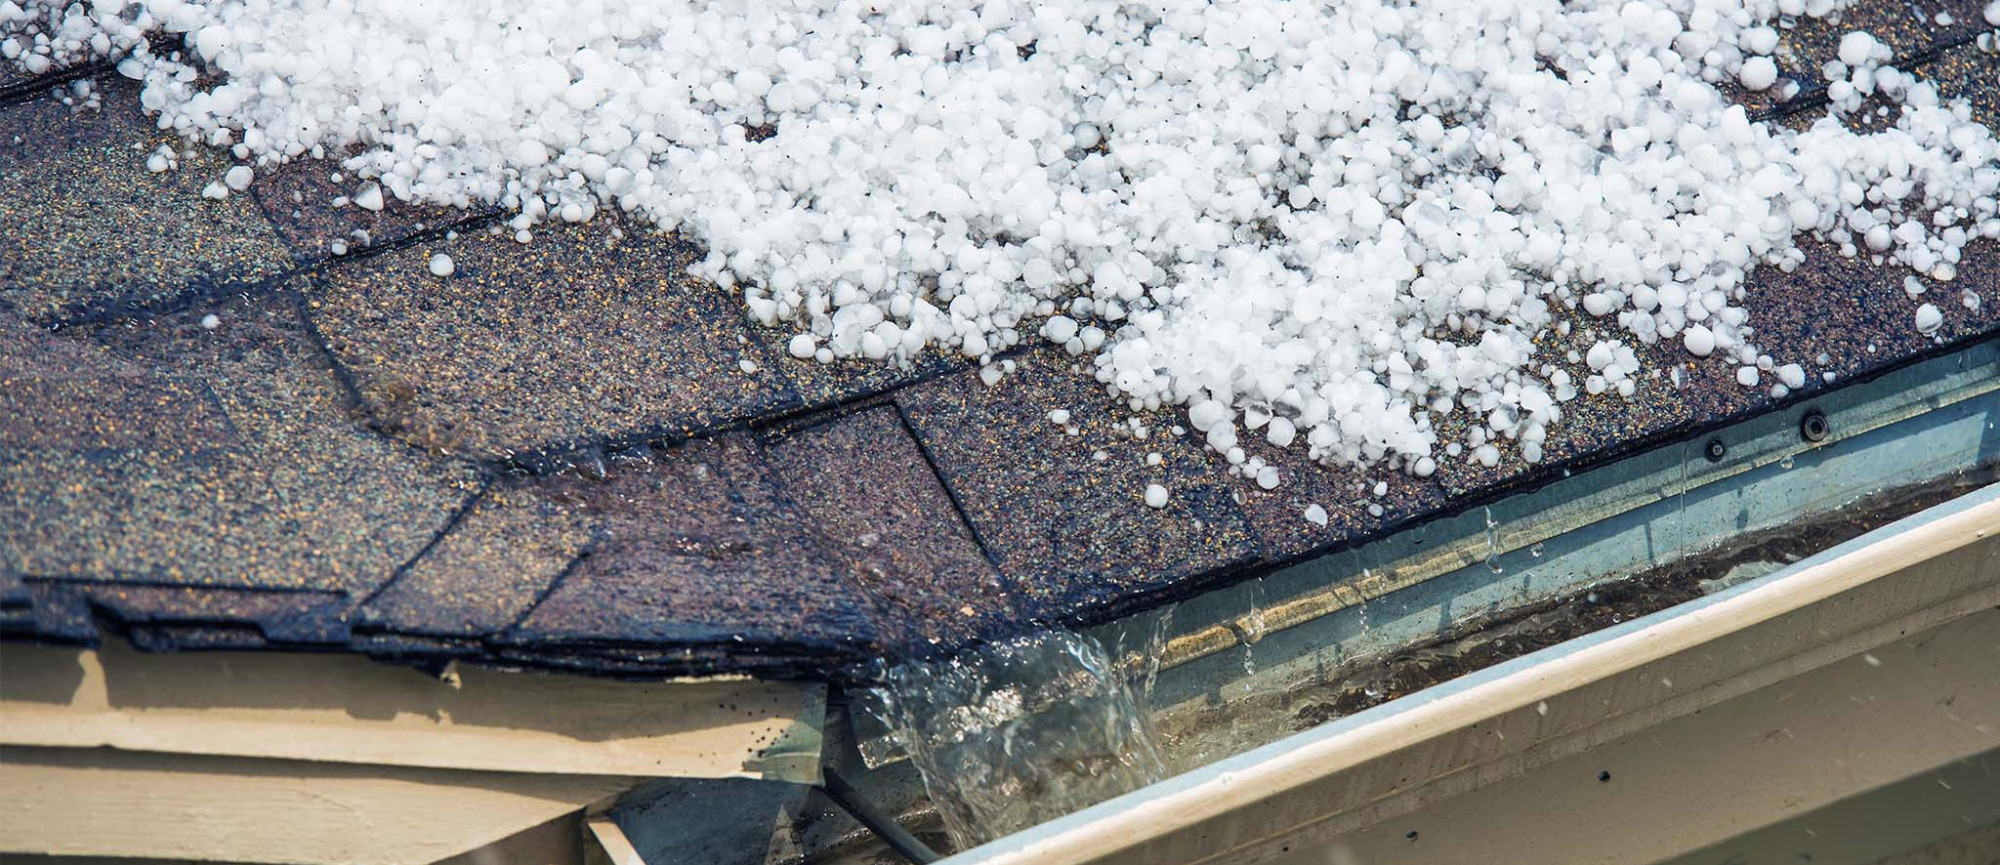 Roof of a Residence Damaged by Hail